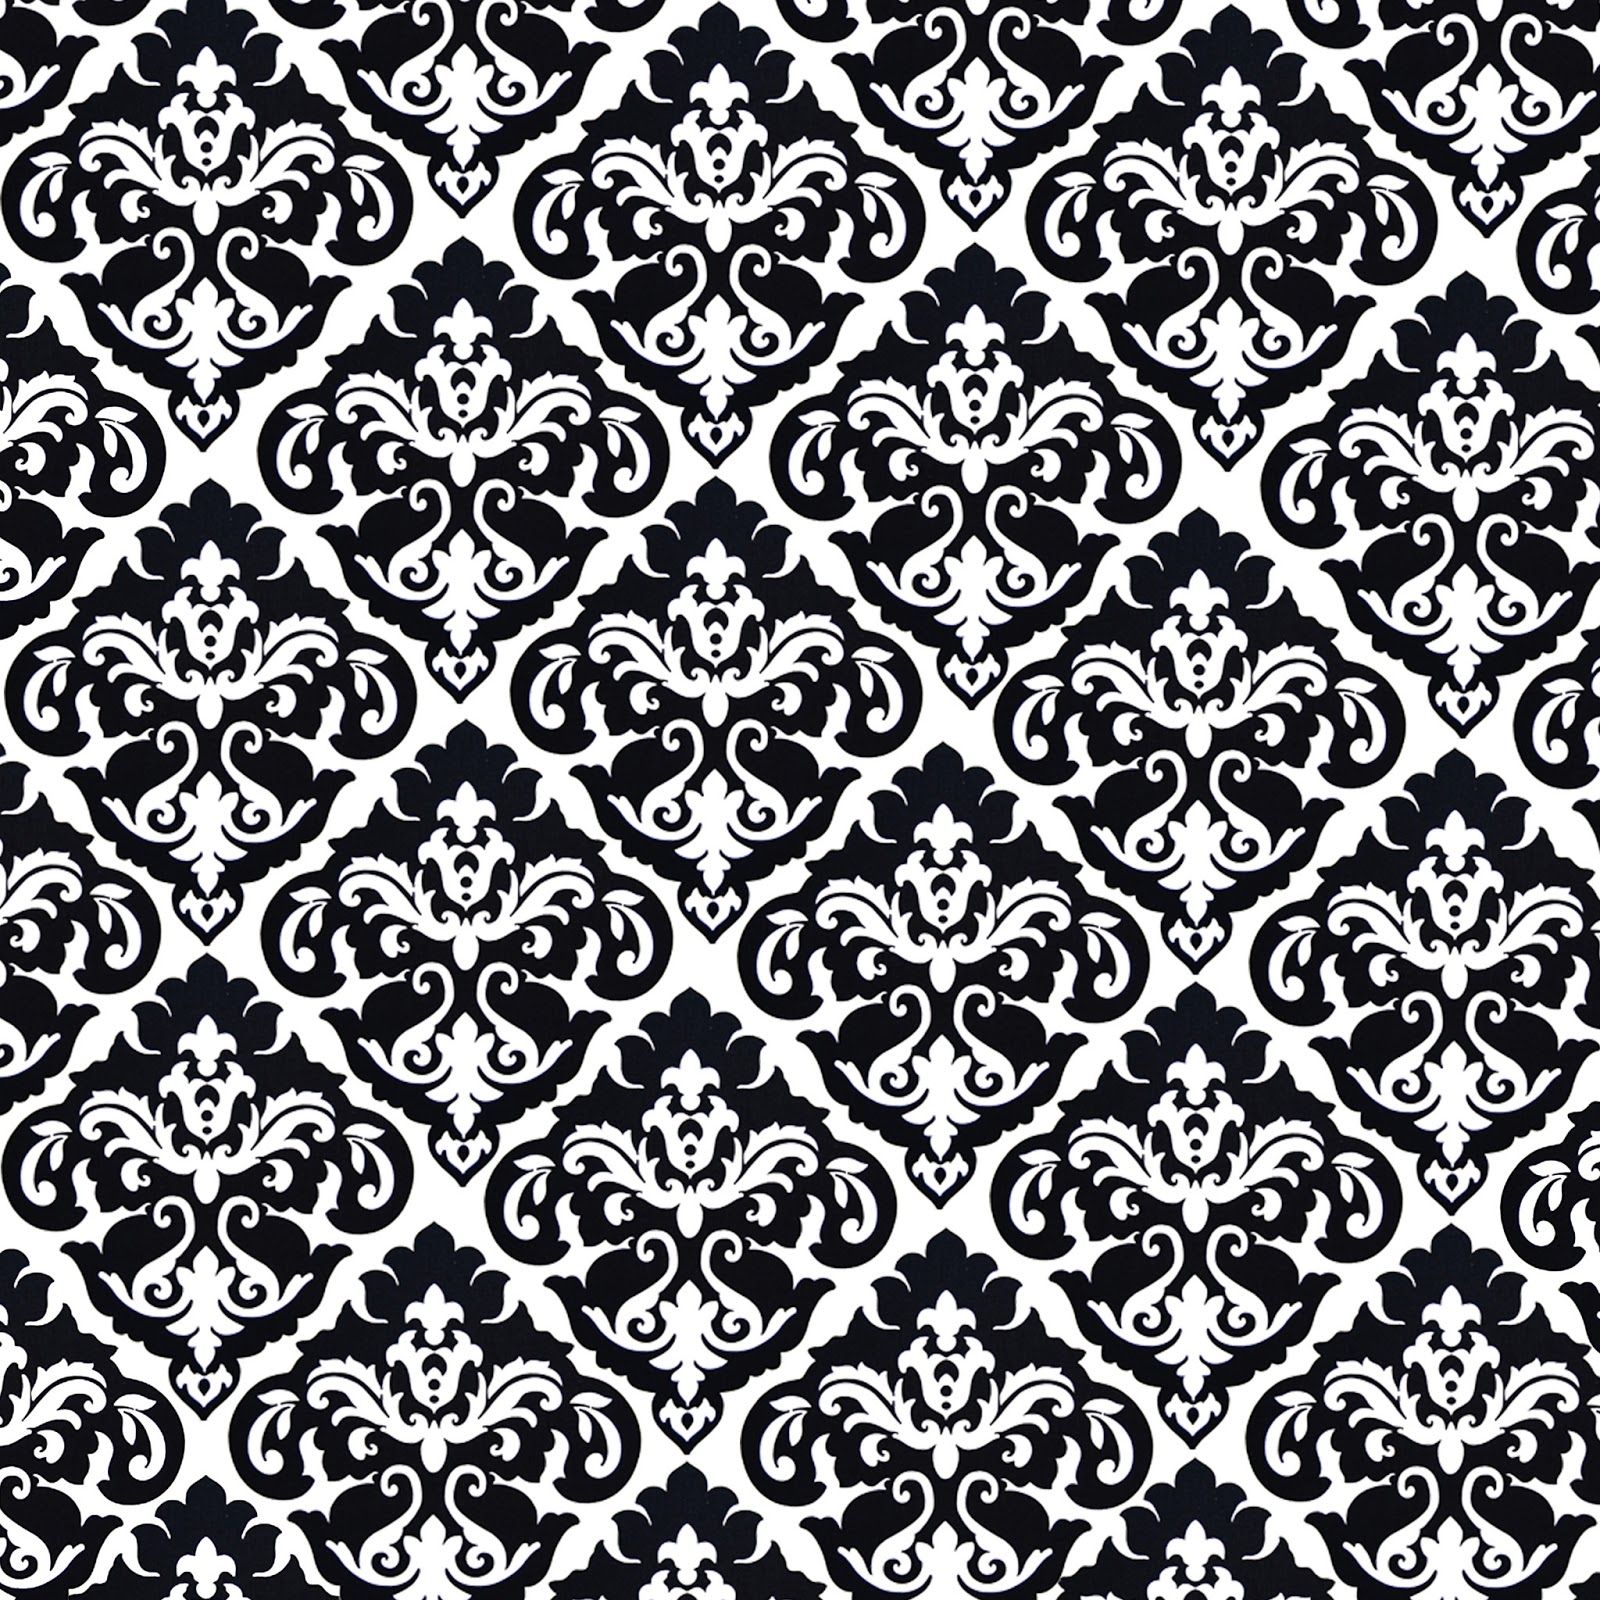 Free download black and white damask pattern wallpaperawsome background wallpaper [1600x1600] for your Desktop, Mobile & Tablet. Explore Black and White Pattern Wallpaper. Black and Red Wallpaper, Black and